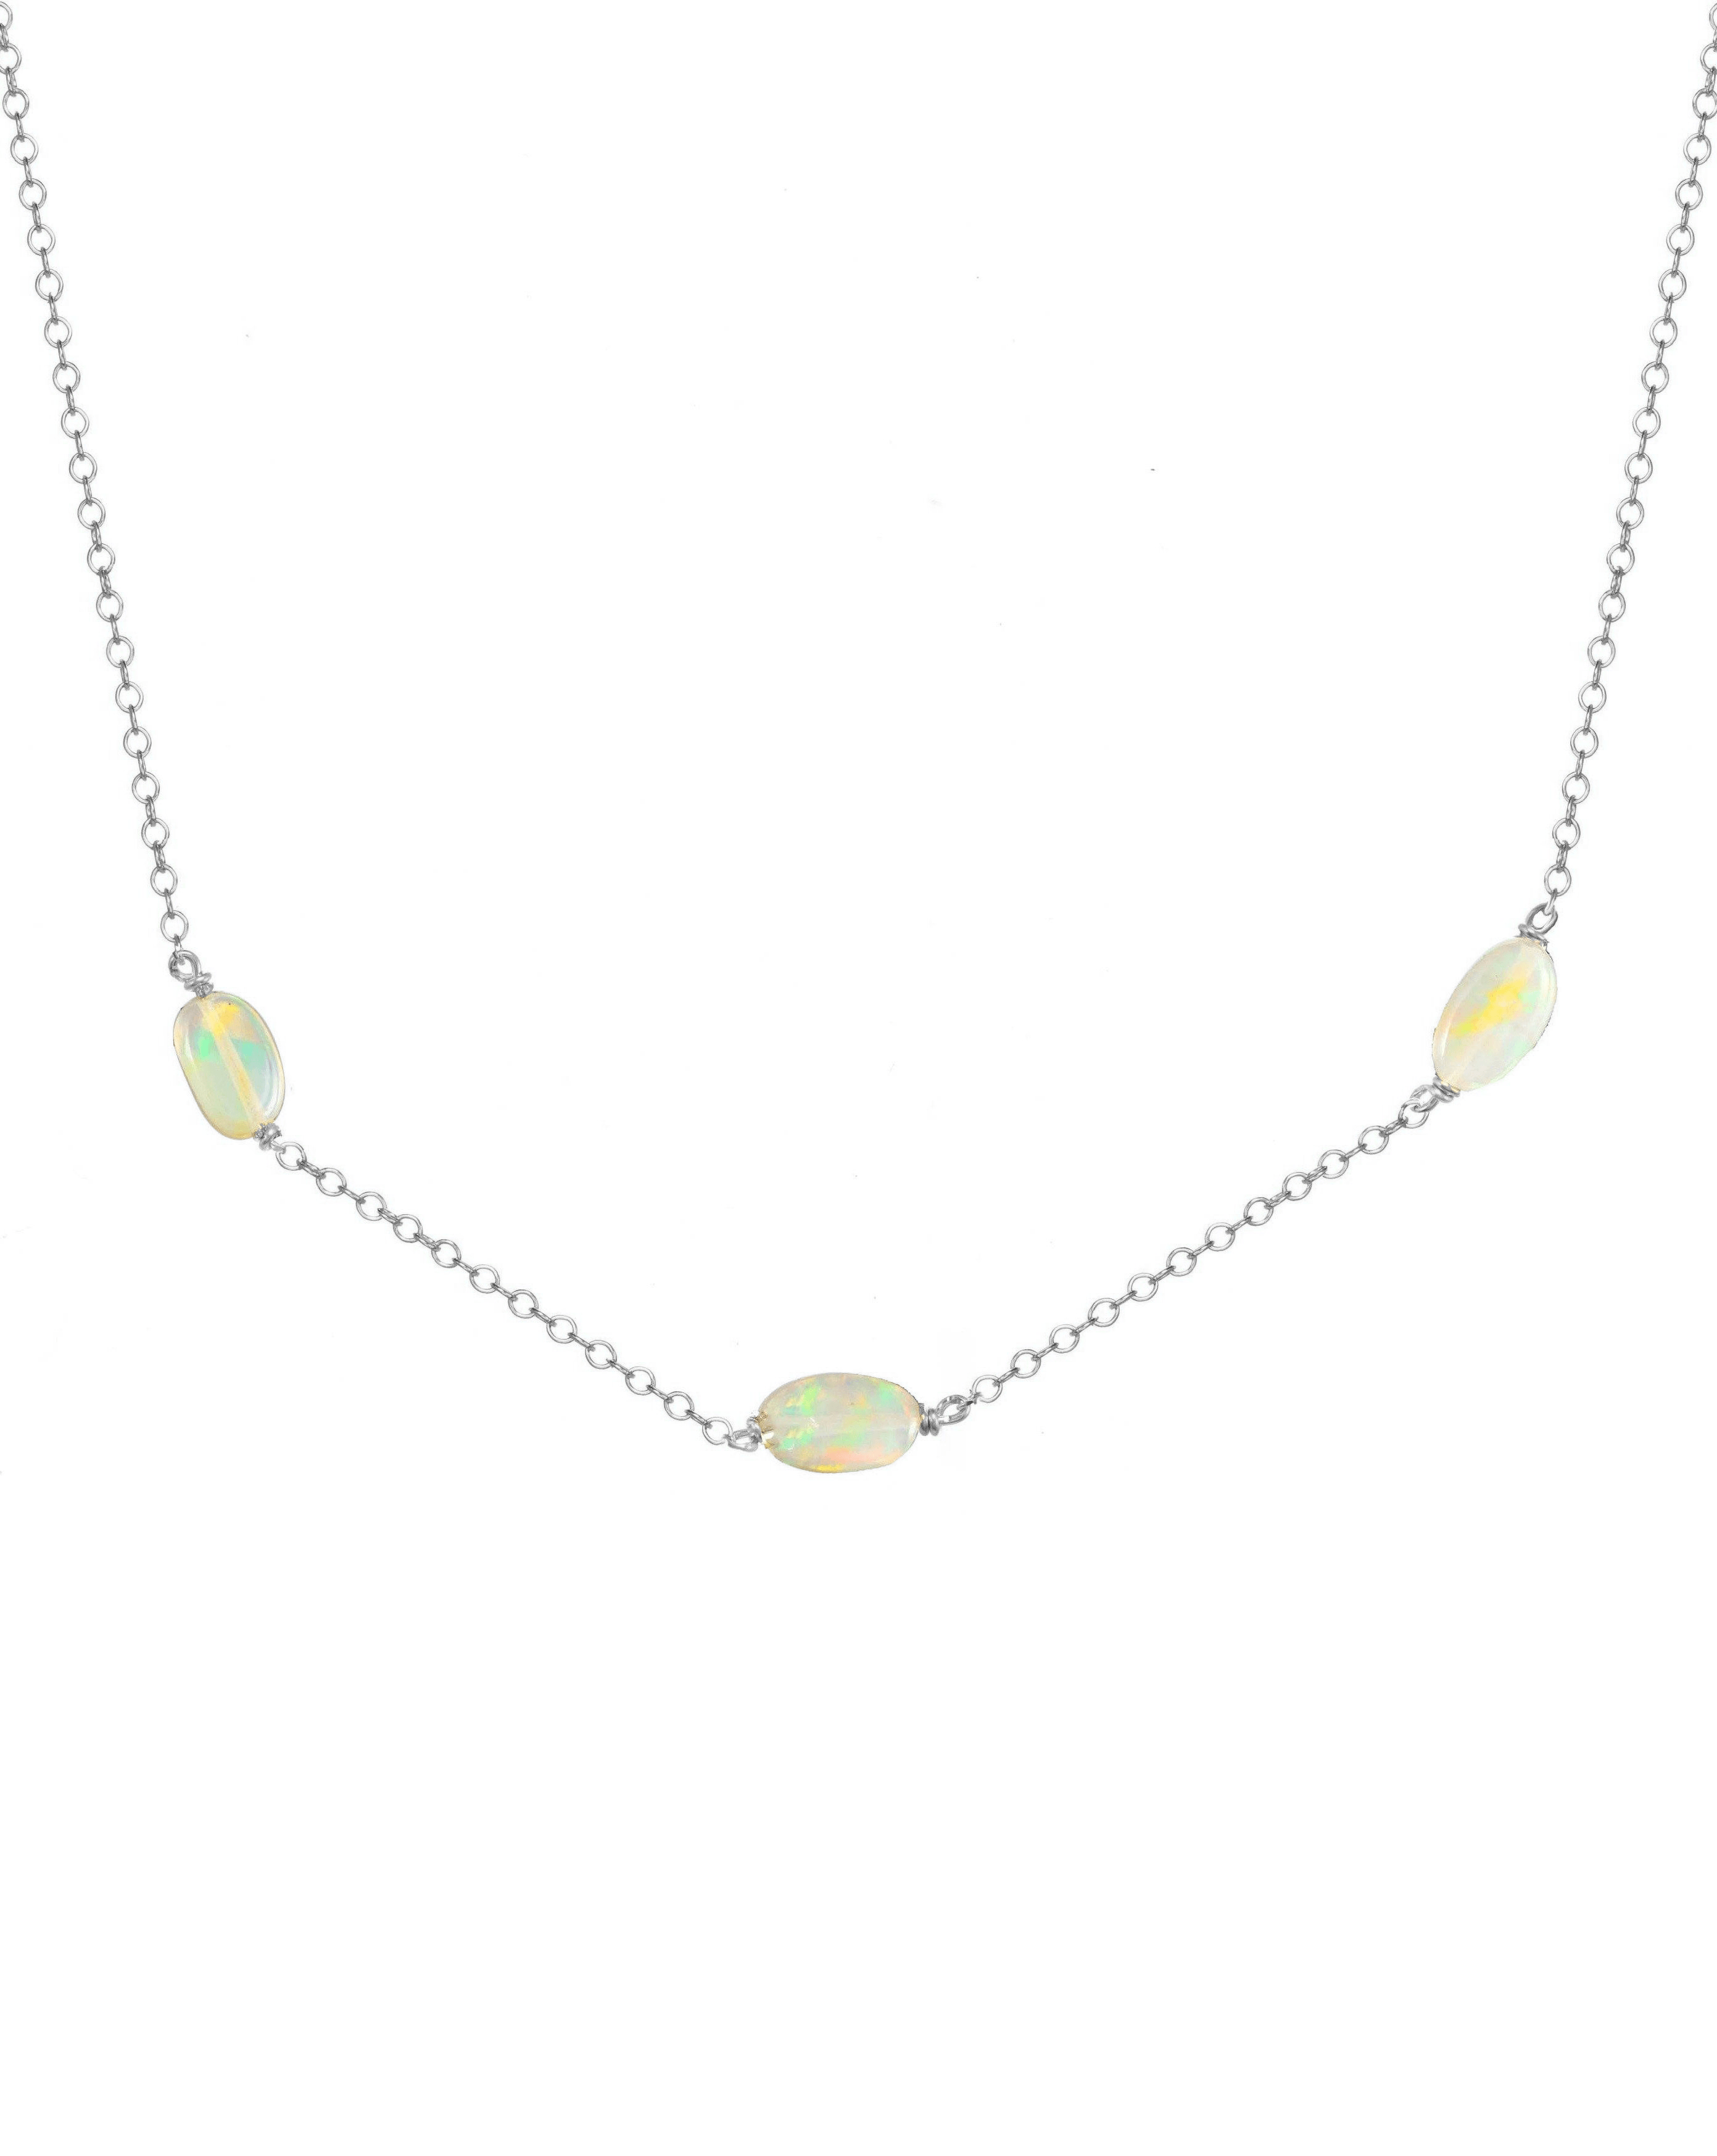 Erin Fire Necklace by KOZAKH. A 16 to 18 inch adjustable length necklace in Sterling Silver, featuring 4mm to 5mm smooth Fire Opal gems.